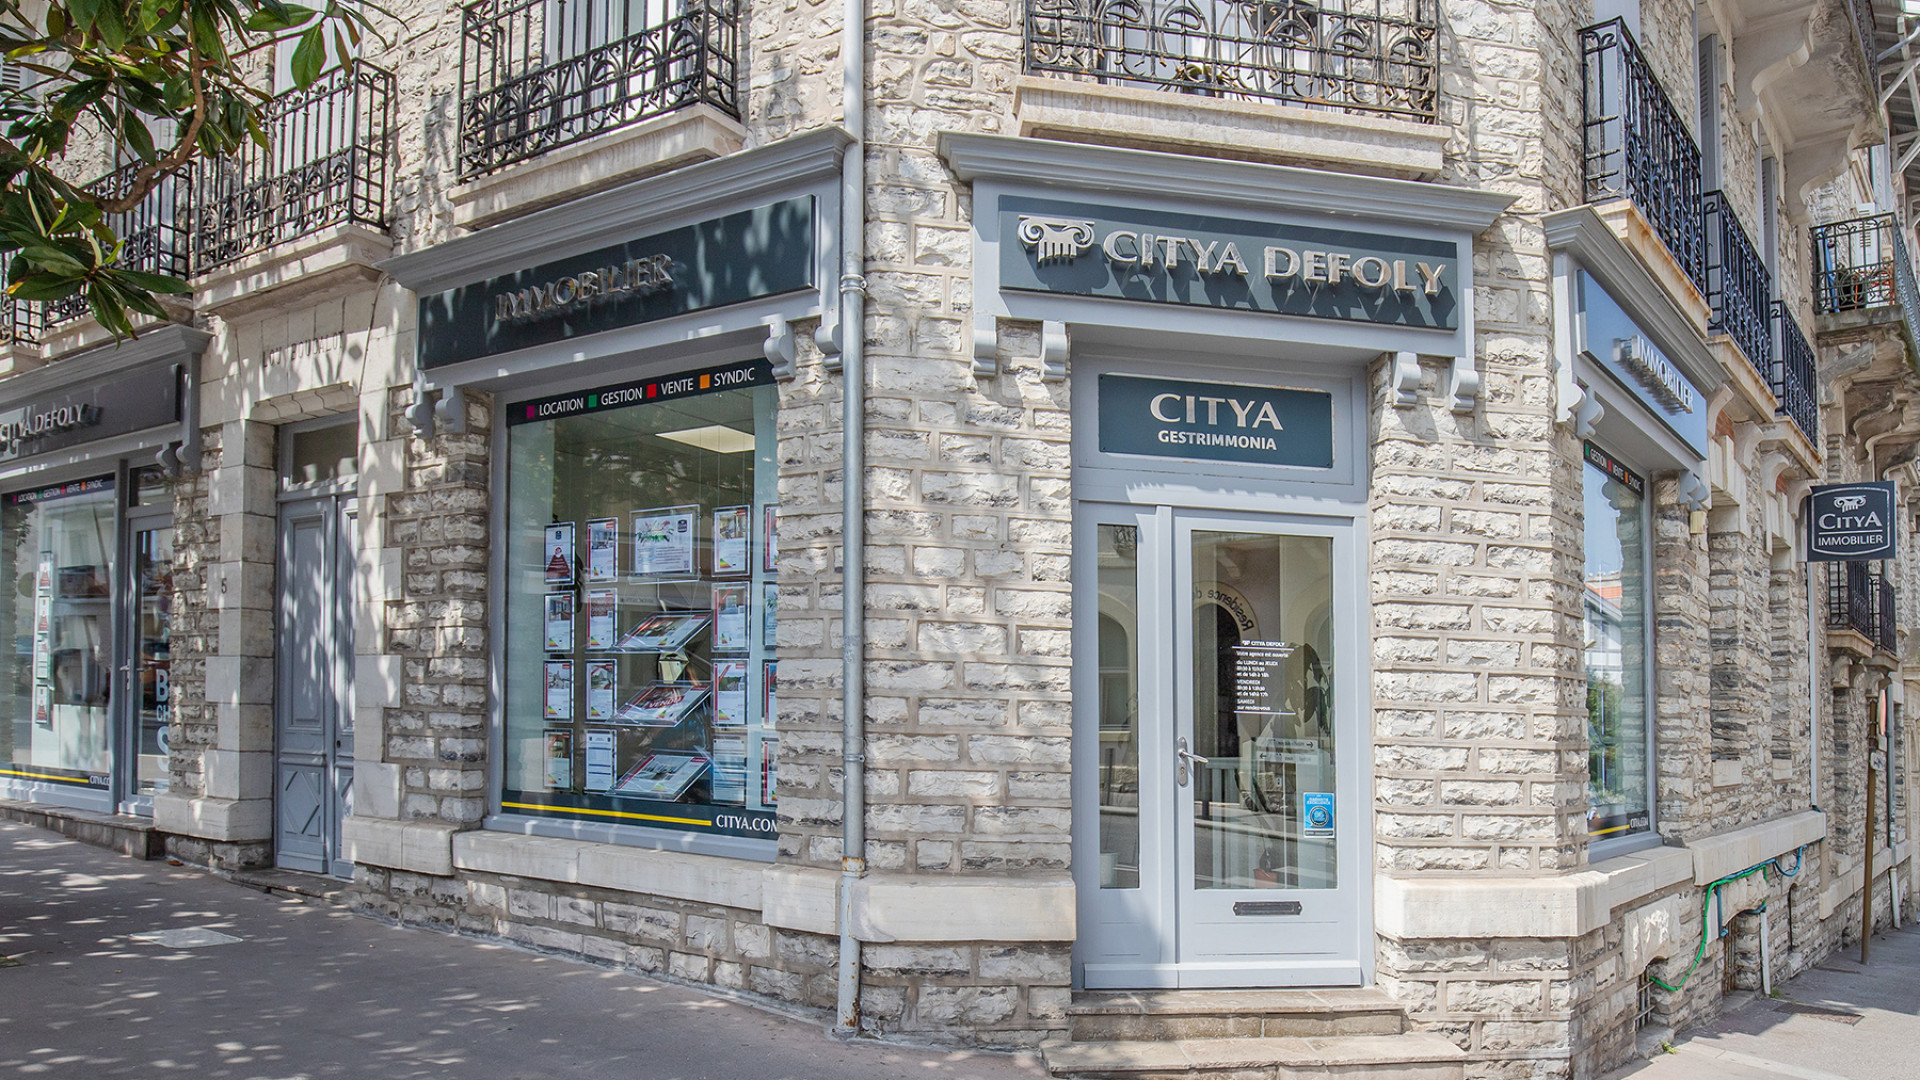 Agence immo Citya Defoly Immobilier